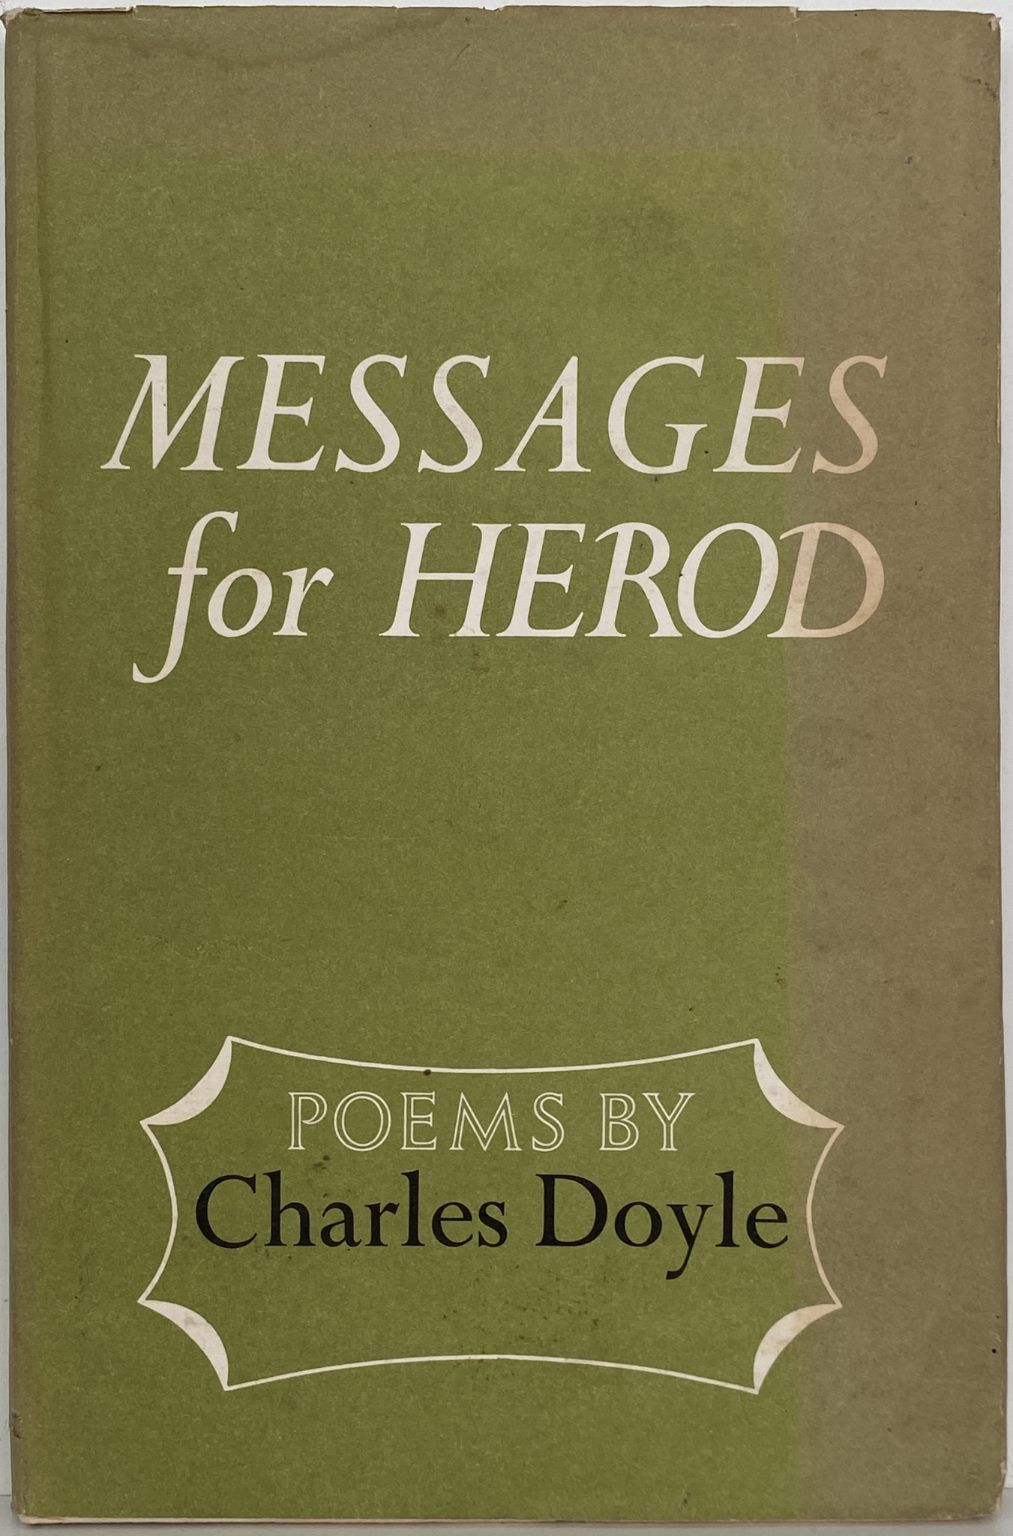 MESSAGES FOR HEROD: Poems